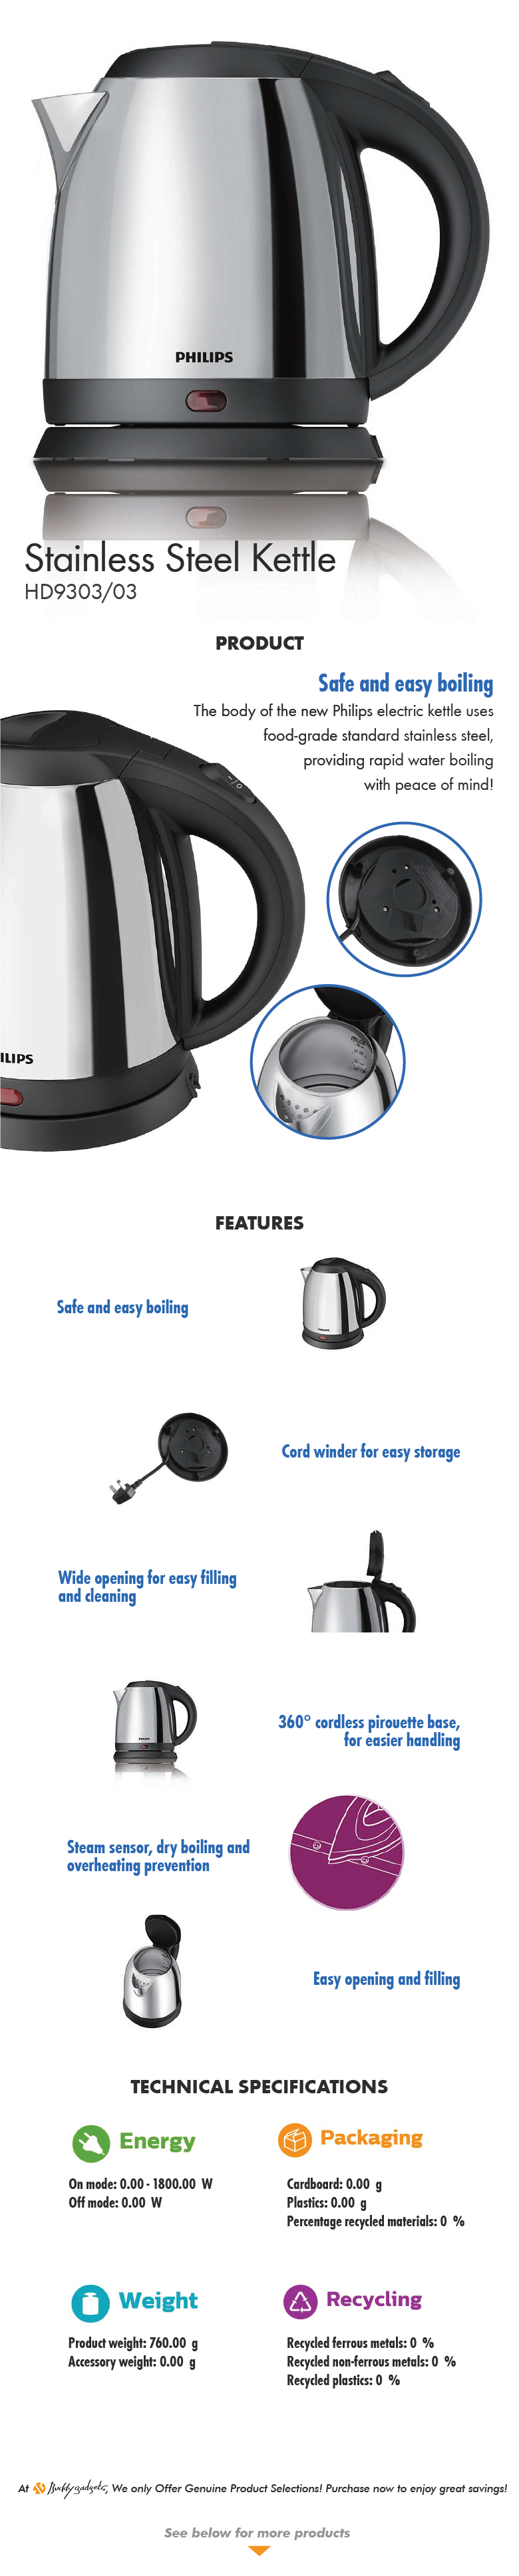 Philips_1.2L_188w_Food-grade_Stainless_Steel_Kettle_v0